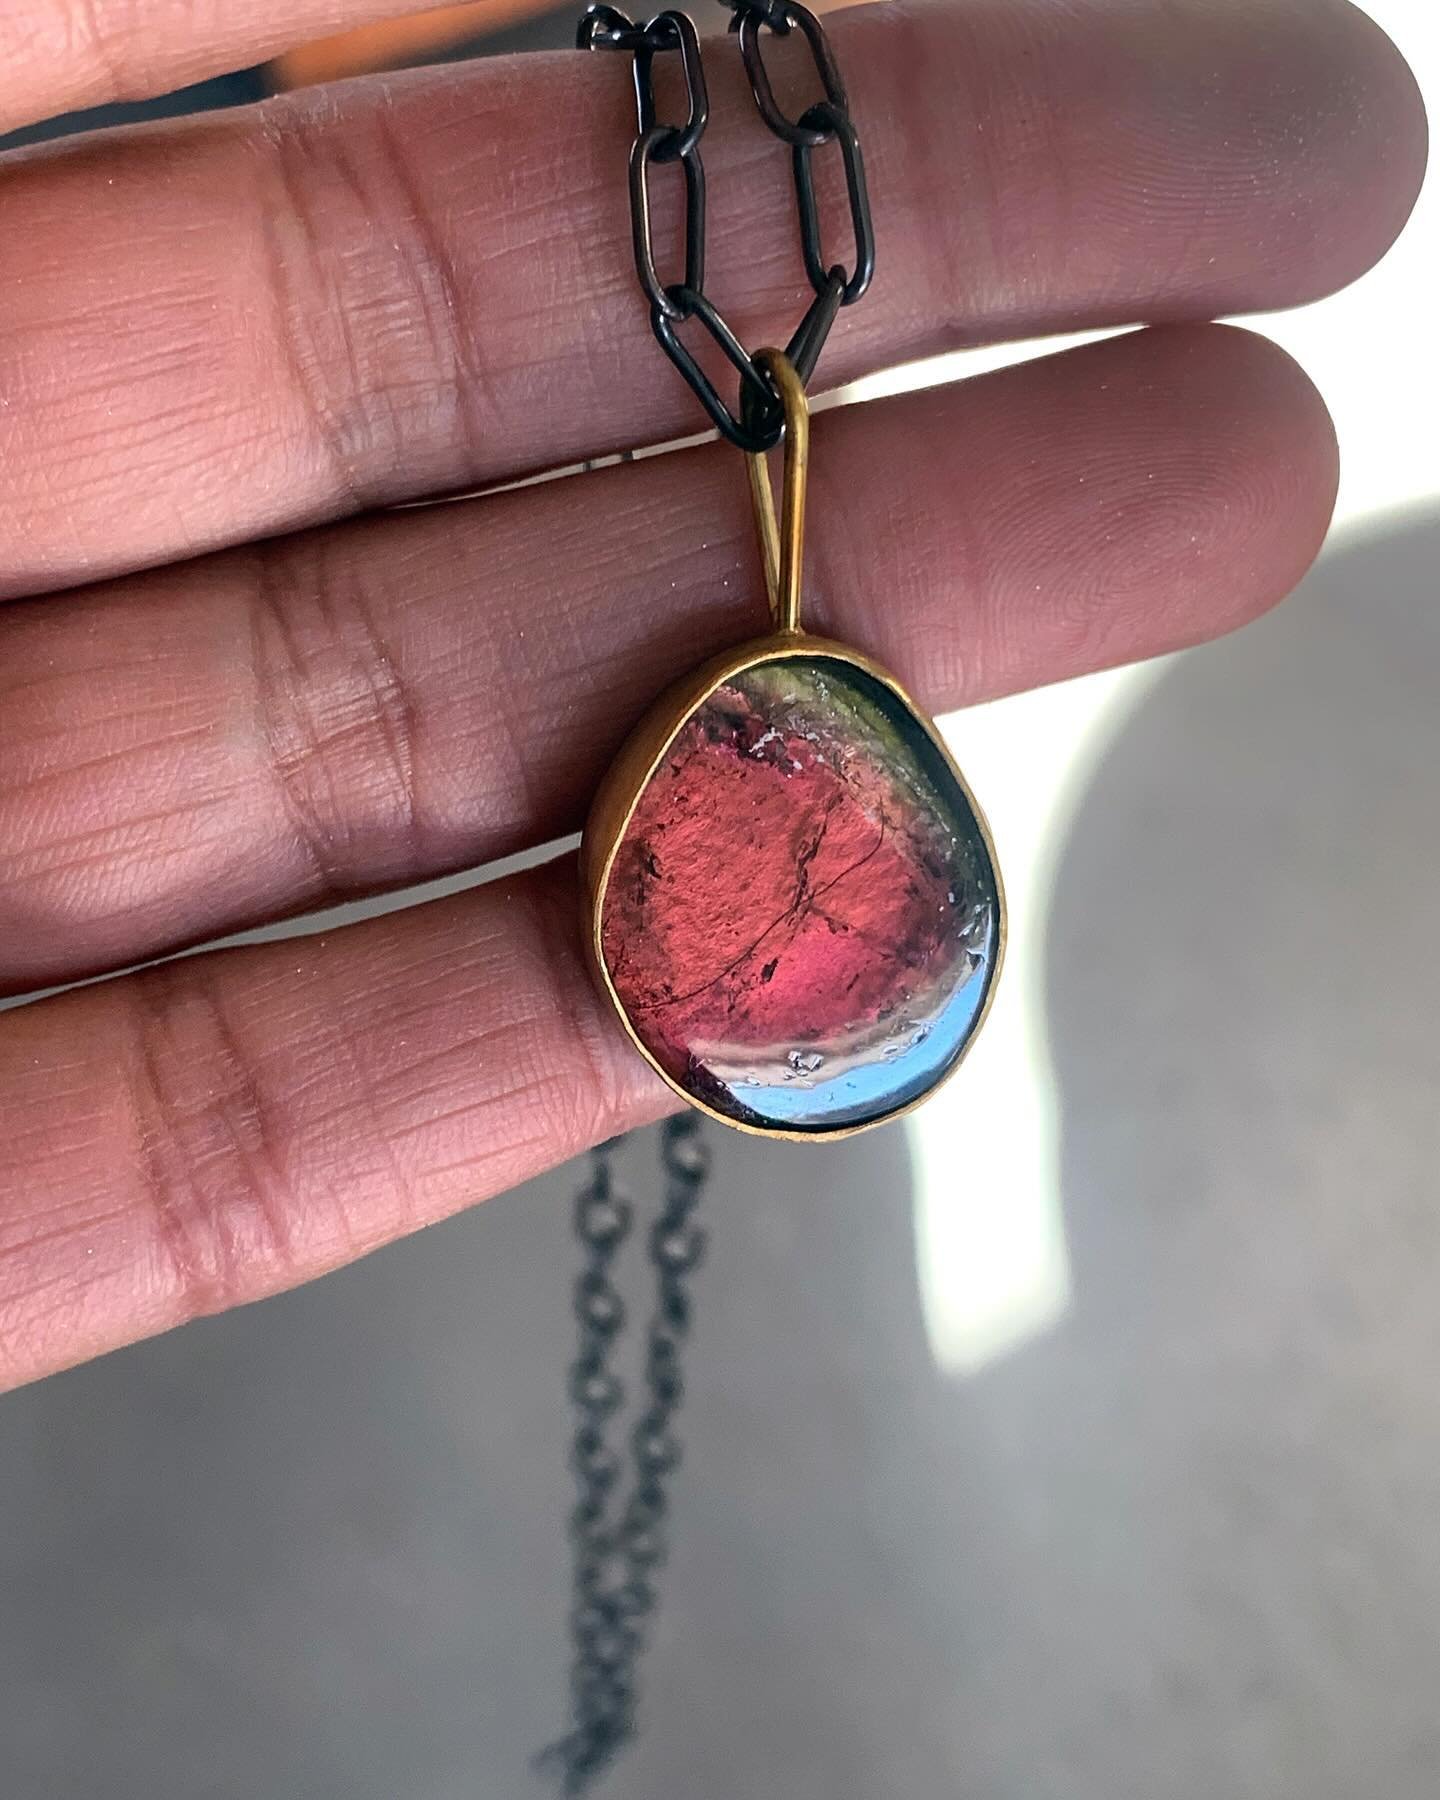 Come dive into the statement gems of Maya Kini... ✨ shown here, watermelon tourmaline set in 22k yellow gold on a handmade oxidized silver chain. 

Meet the Artists of CALIFORNIA LOVE SONG this Saturday, May 11th from 3:30 - 5:30 PM. @mkini @laura_li